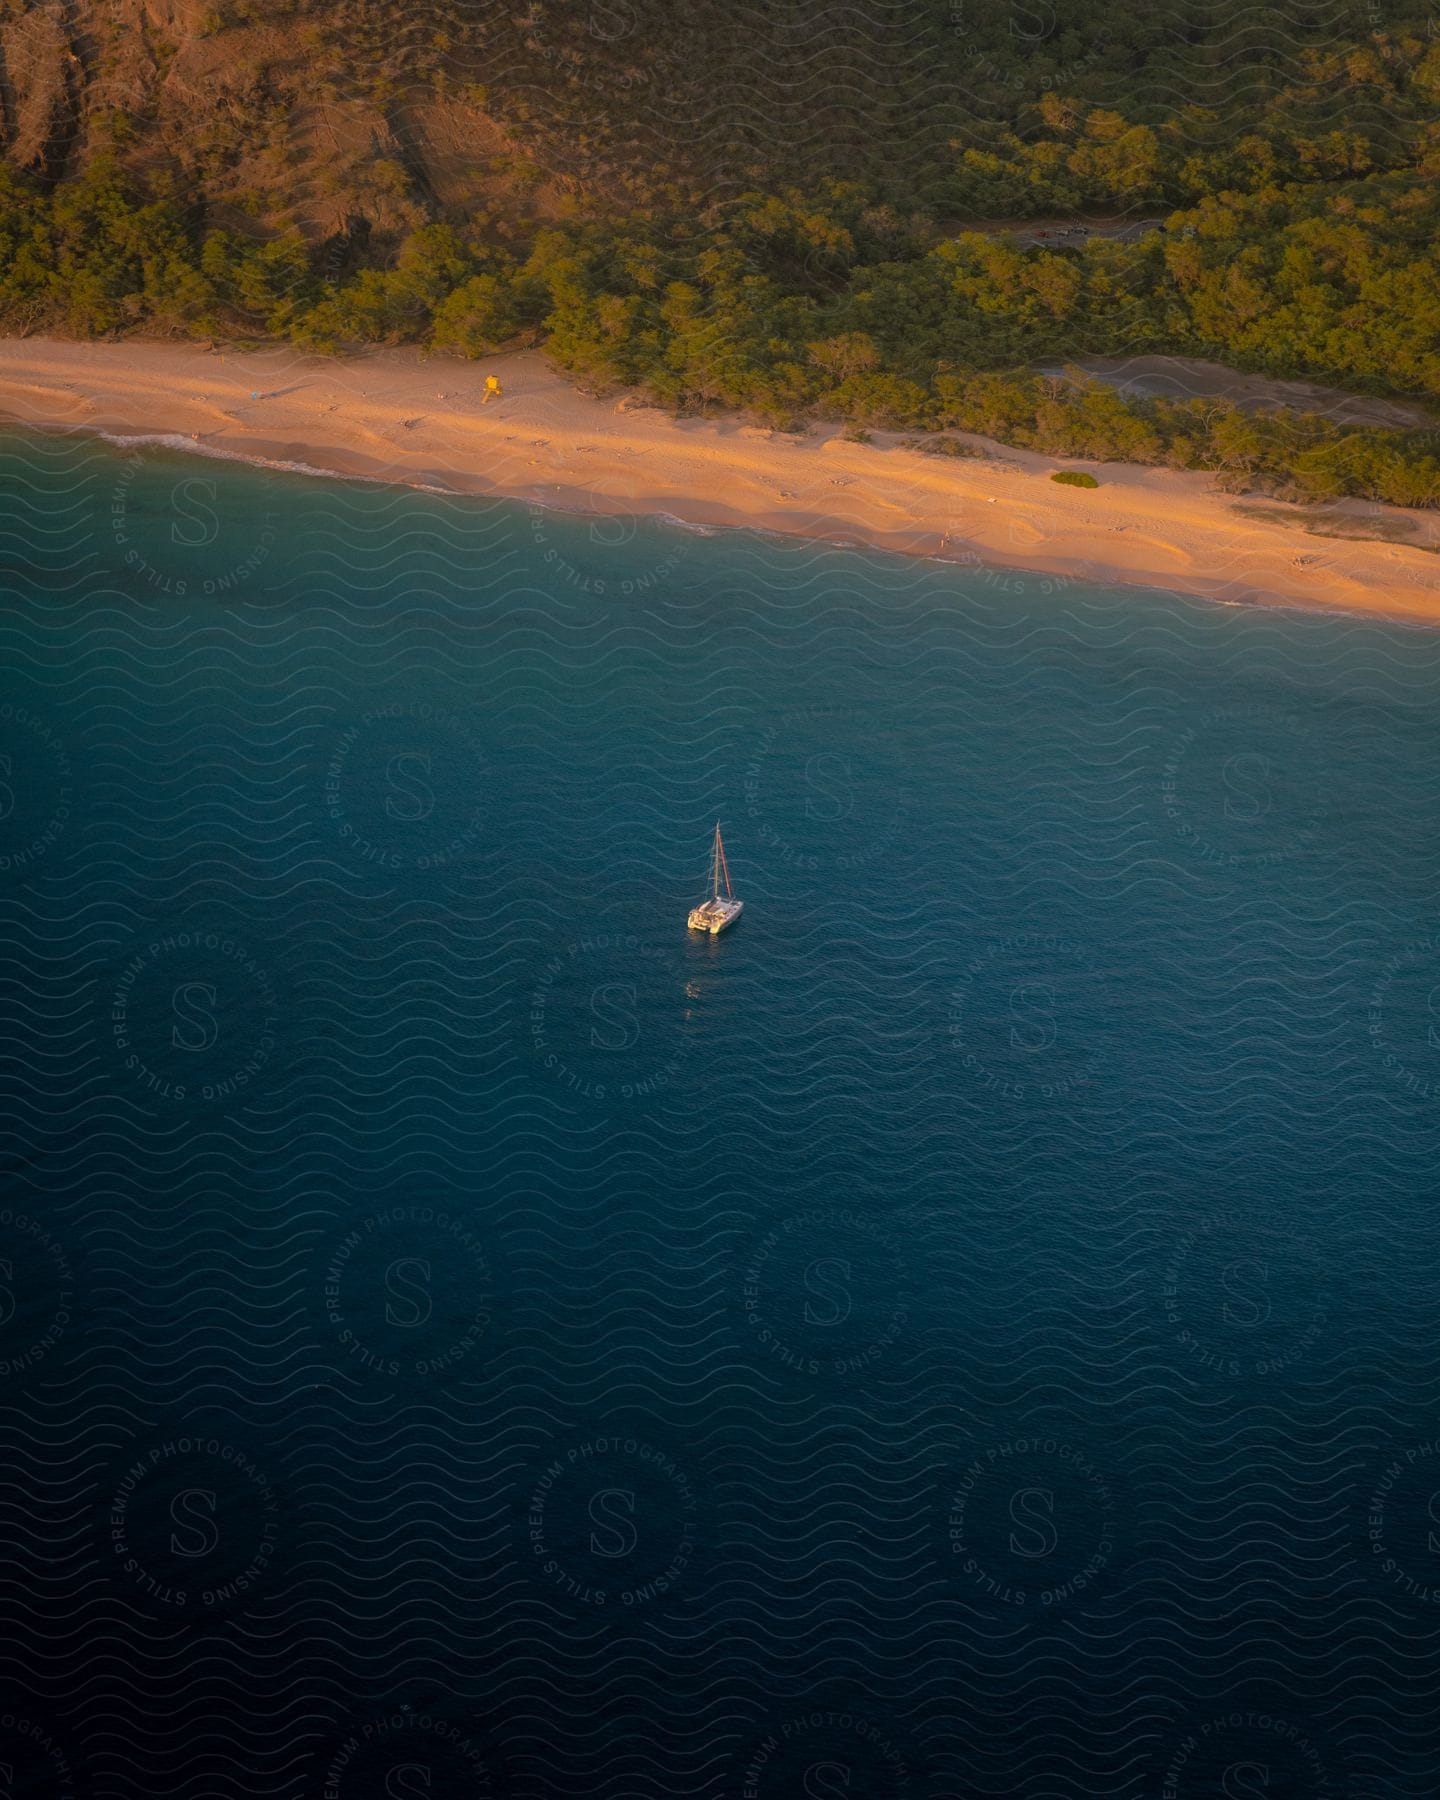 A sailboat drifts near a sandy beach, green vegetation is in the background